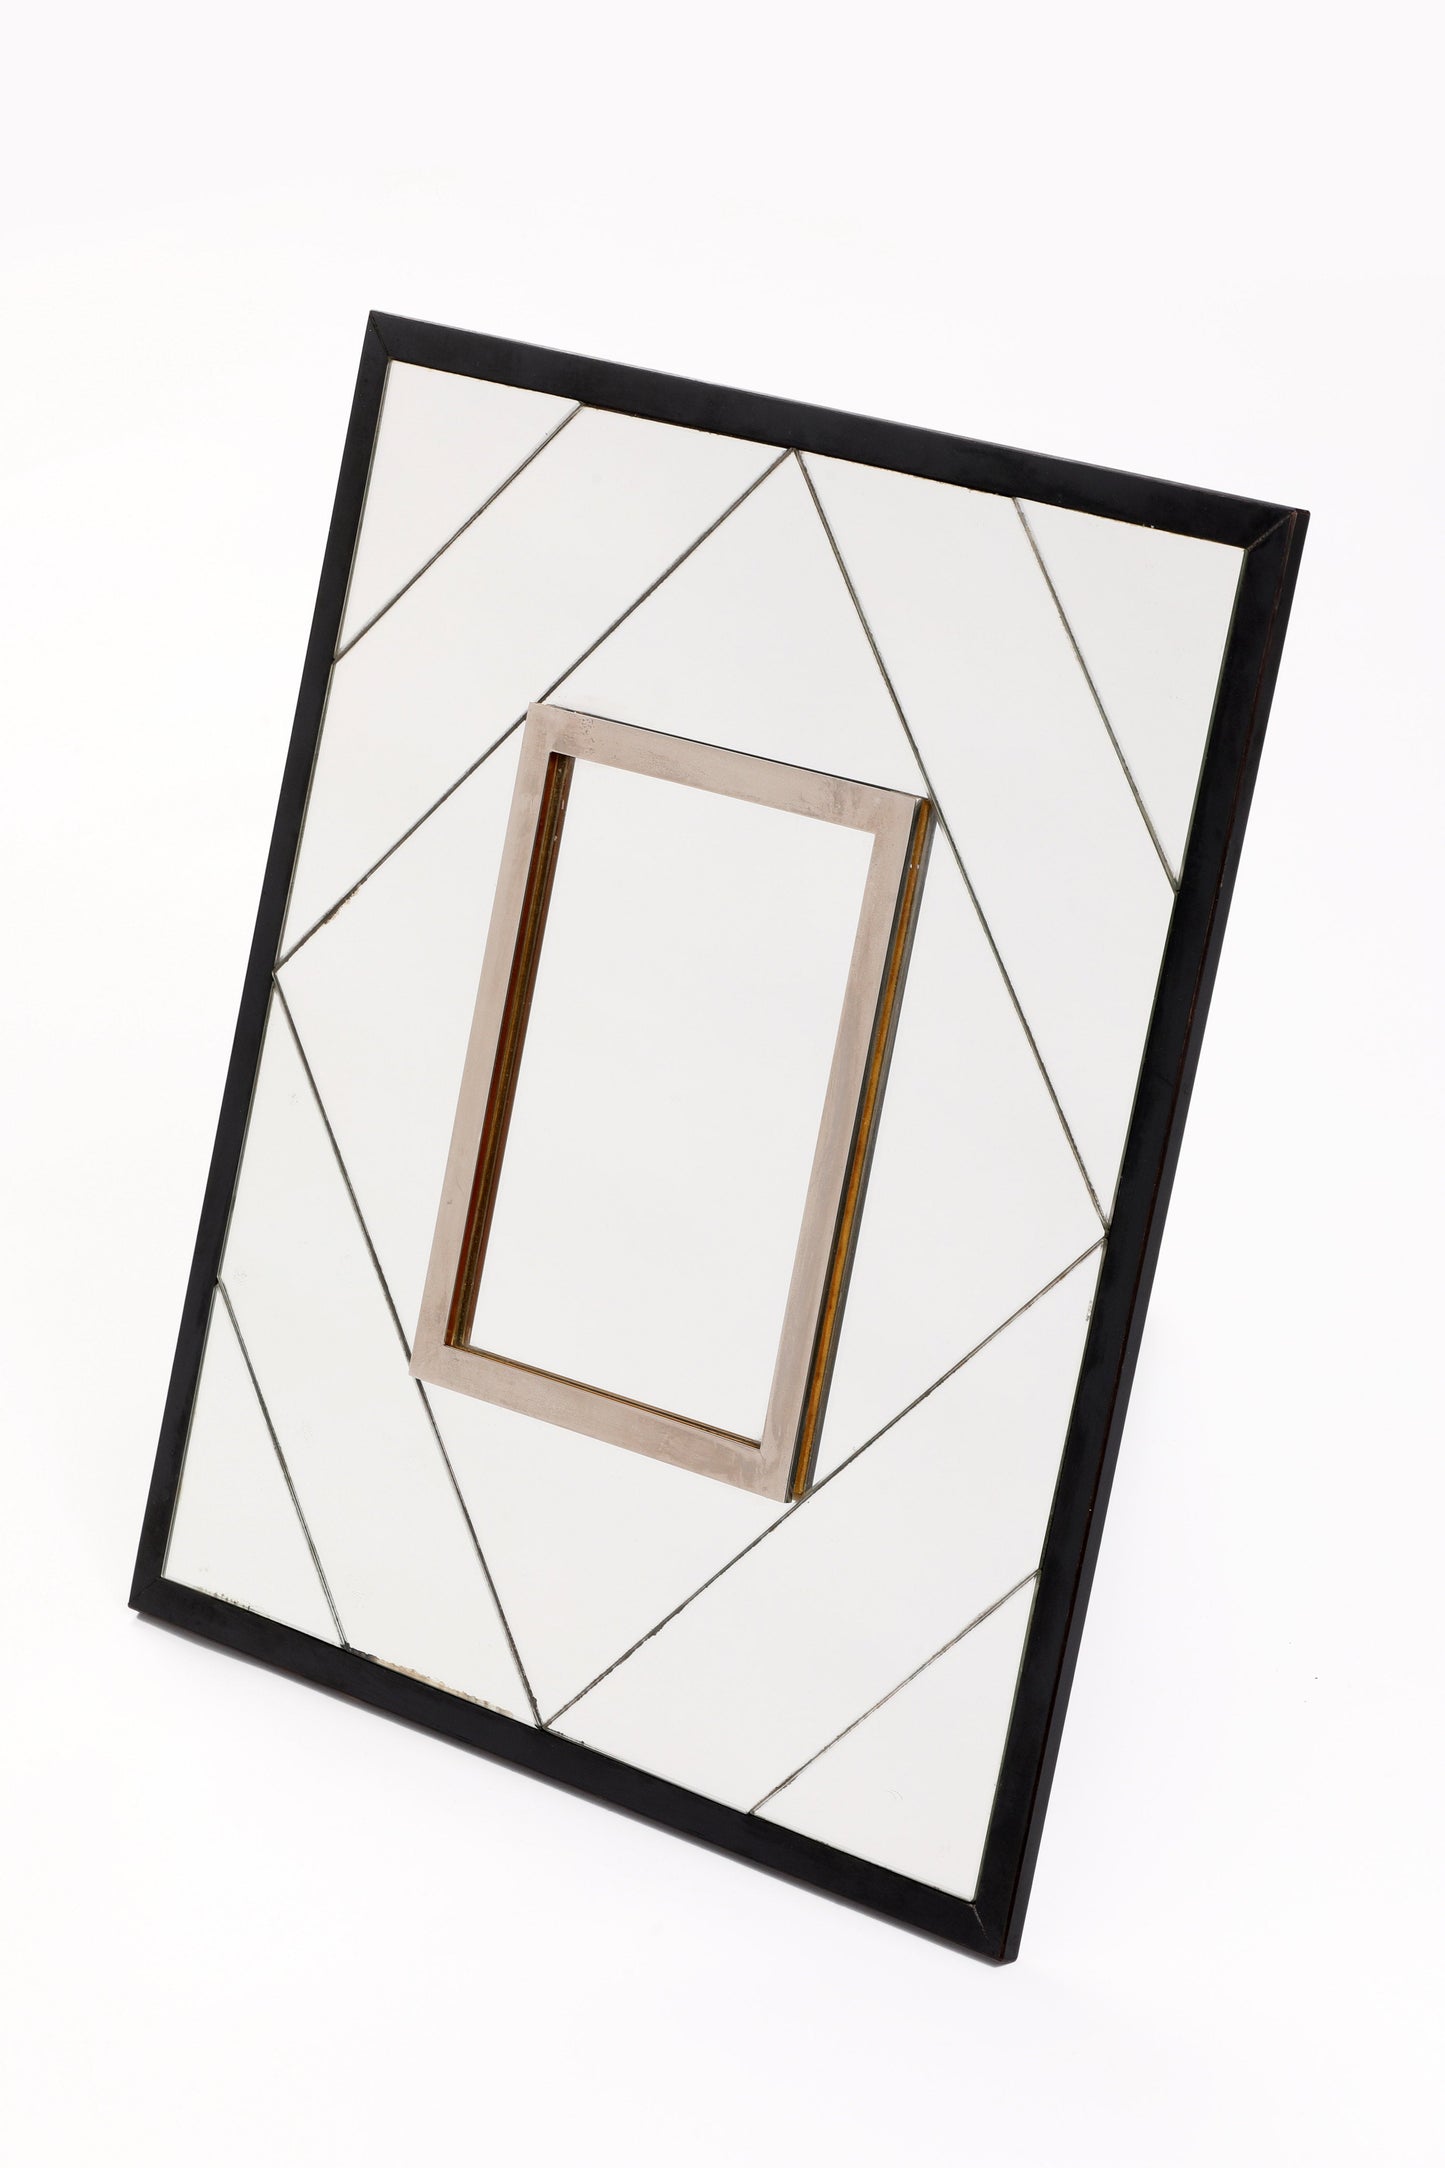 Mirrored frame from the 70s with diagonal lines